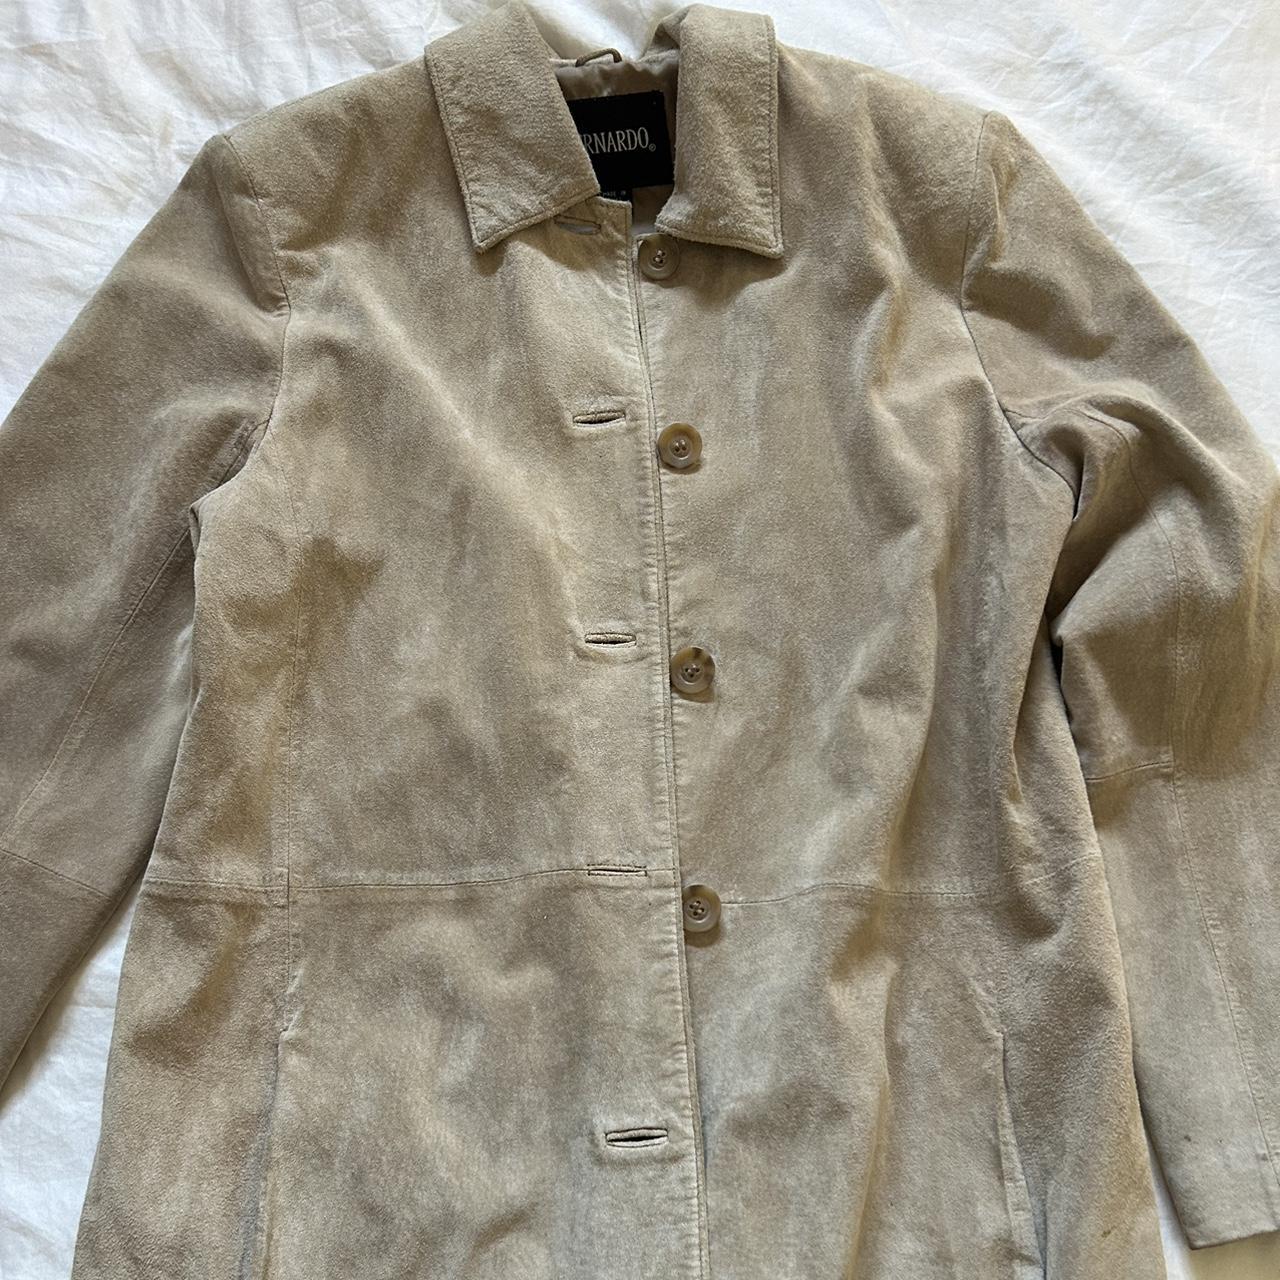 Tan suede jacket, minor imperfections M/L but i like... - Depop